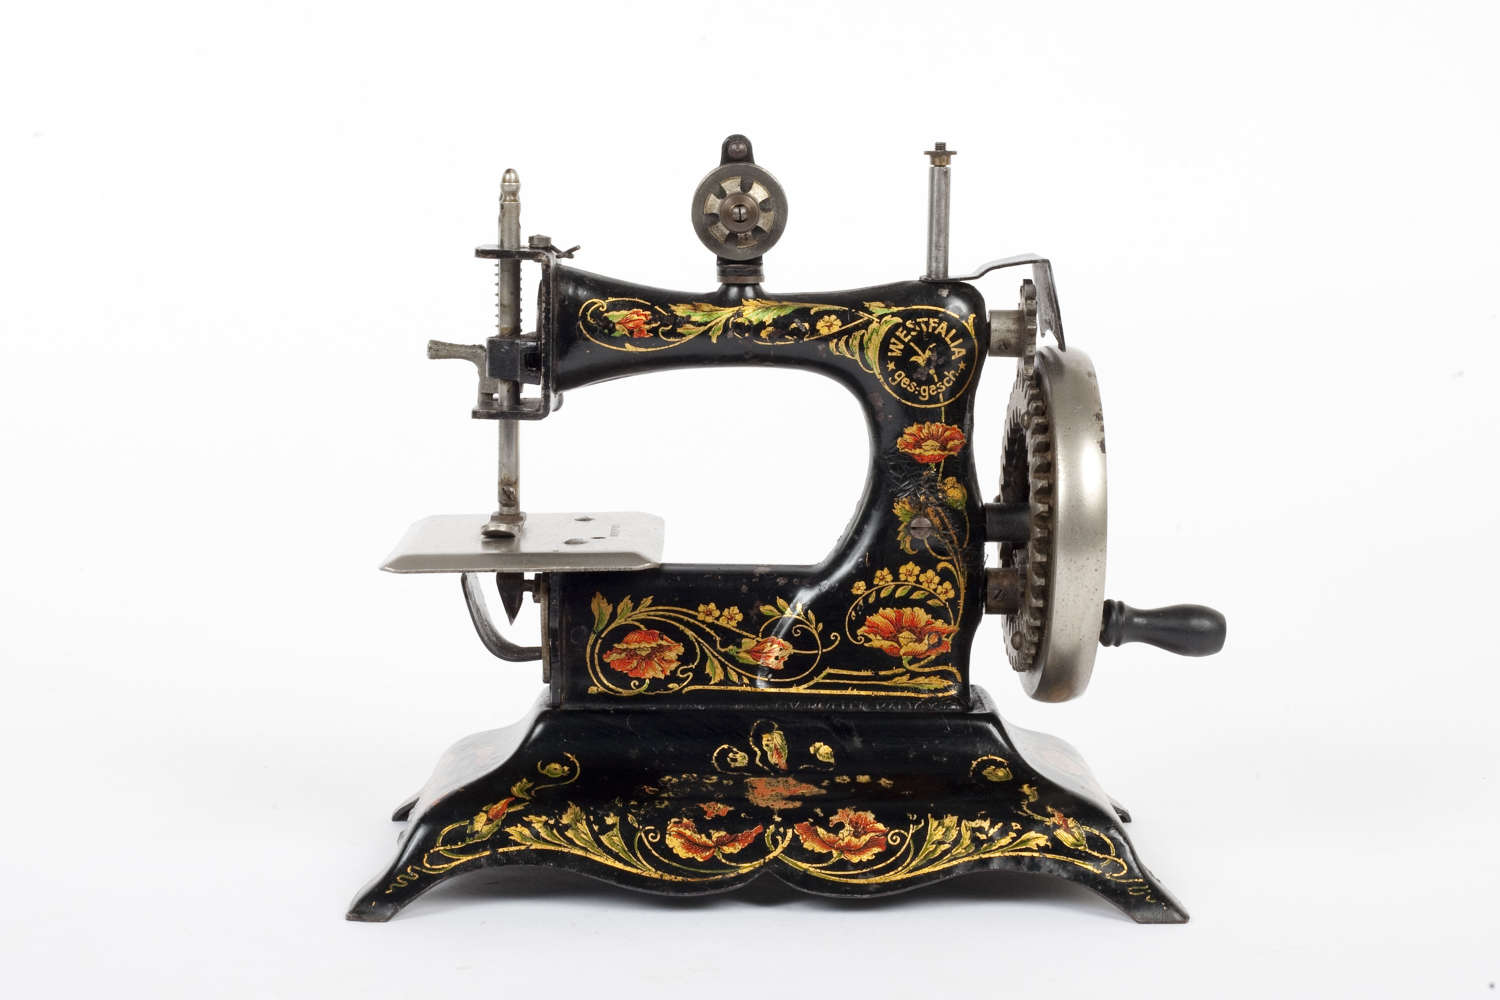 'Westfalia' or 'No.7' sewing machine by Casige